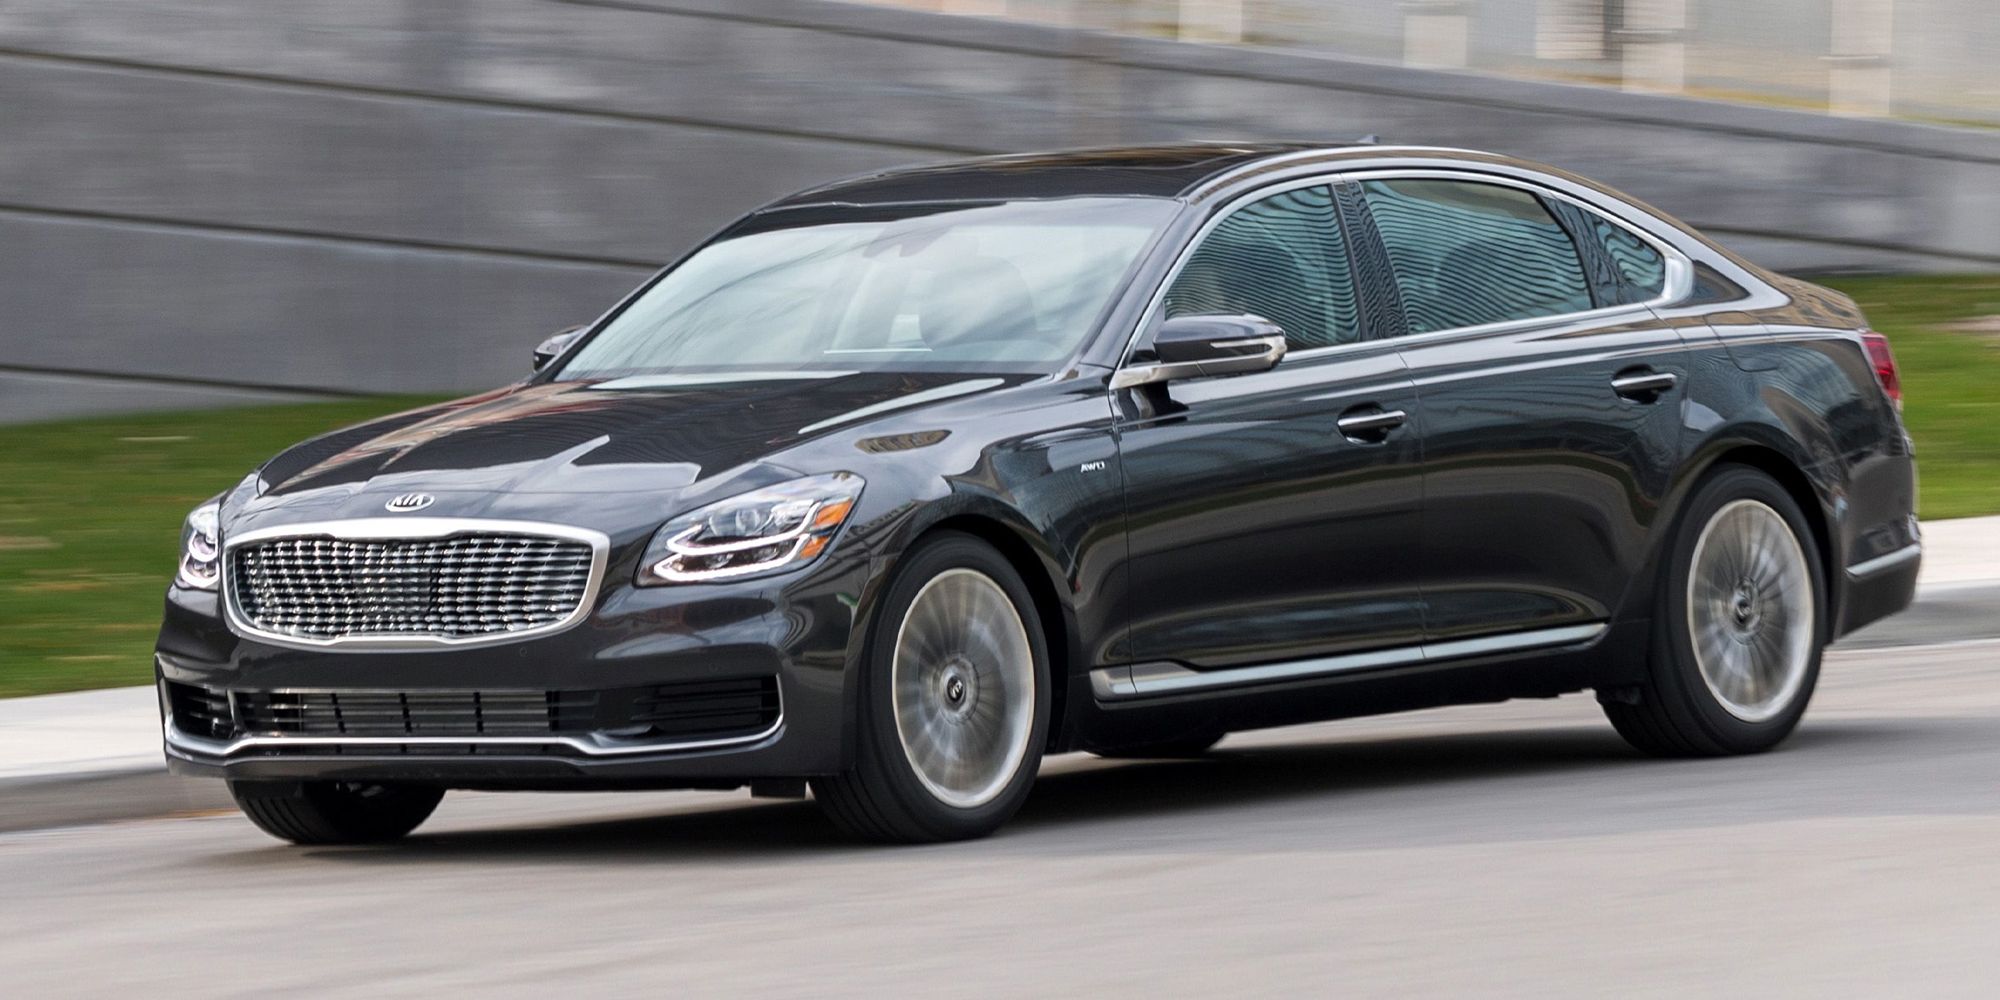 The second generation K900 on the move